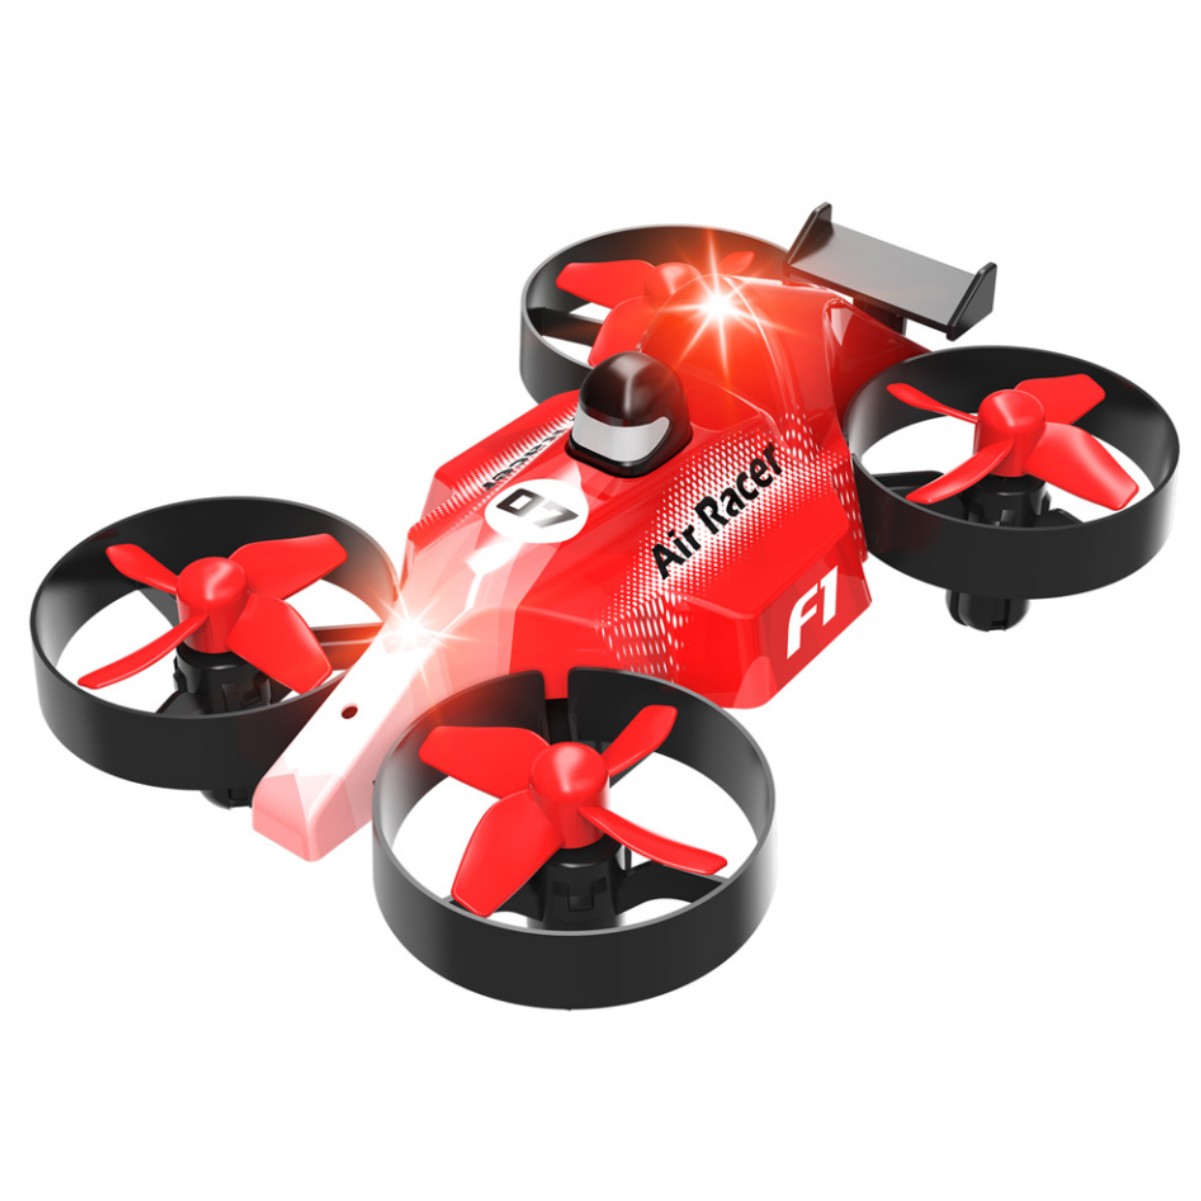 2.4g Mini Drone Headless Mode Altitude Hold One-Key Take Off/Landing 3D Flip RC Helicopter Model Toys